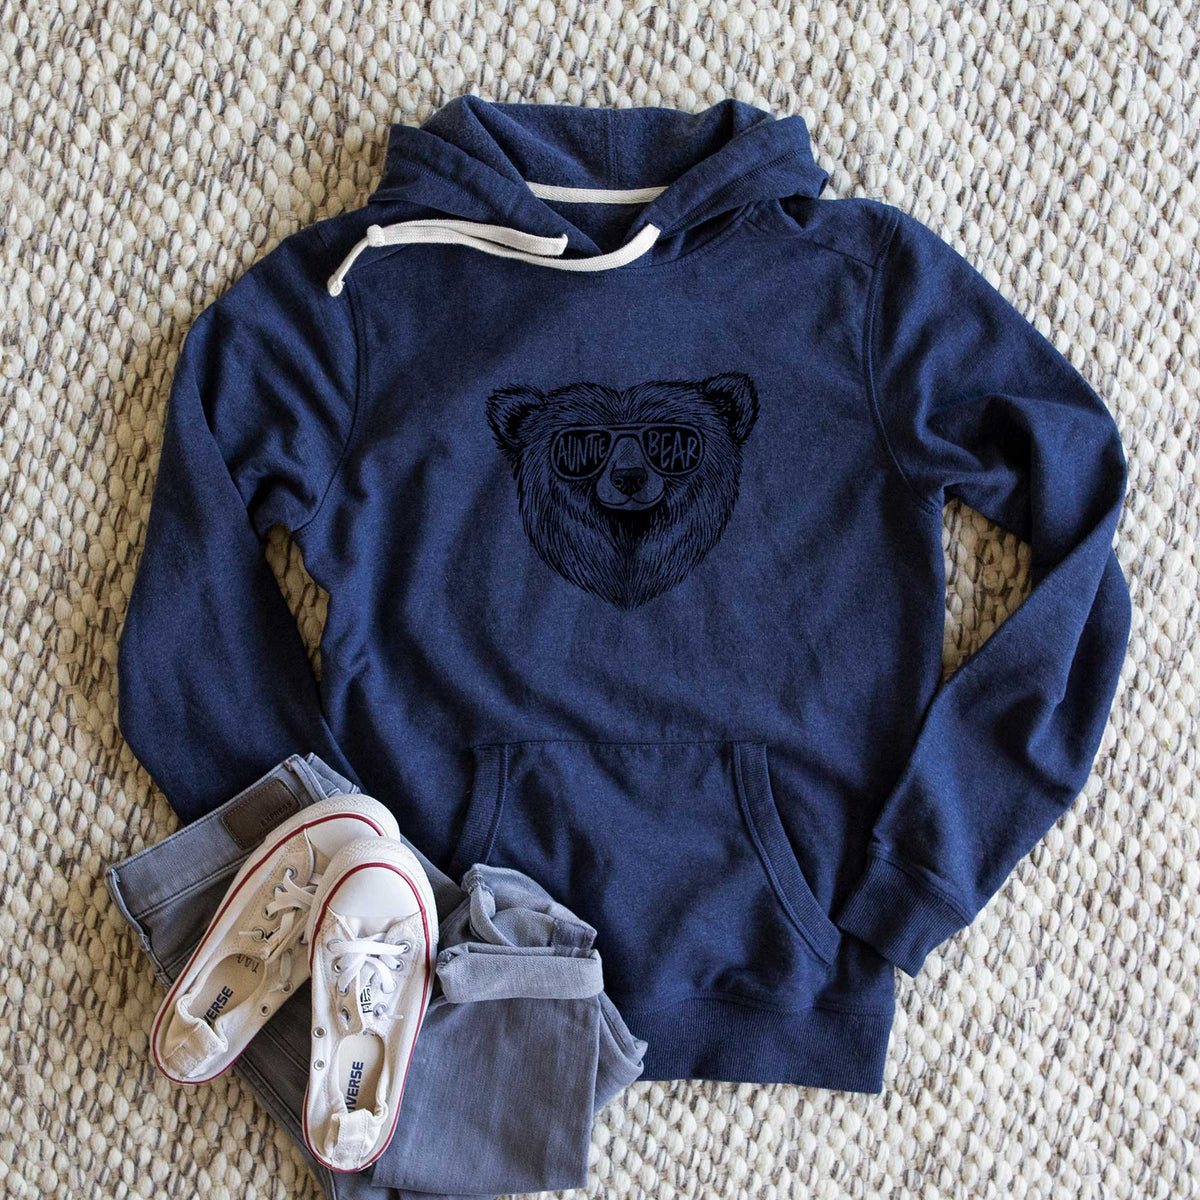 Auntie Bear - Unisex Recycled Hoodie - CLOSEOUT - FINAL SALE